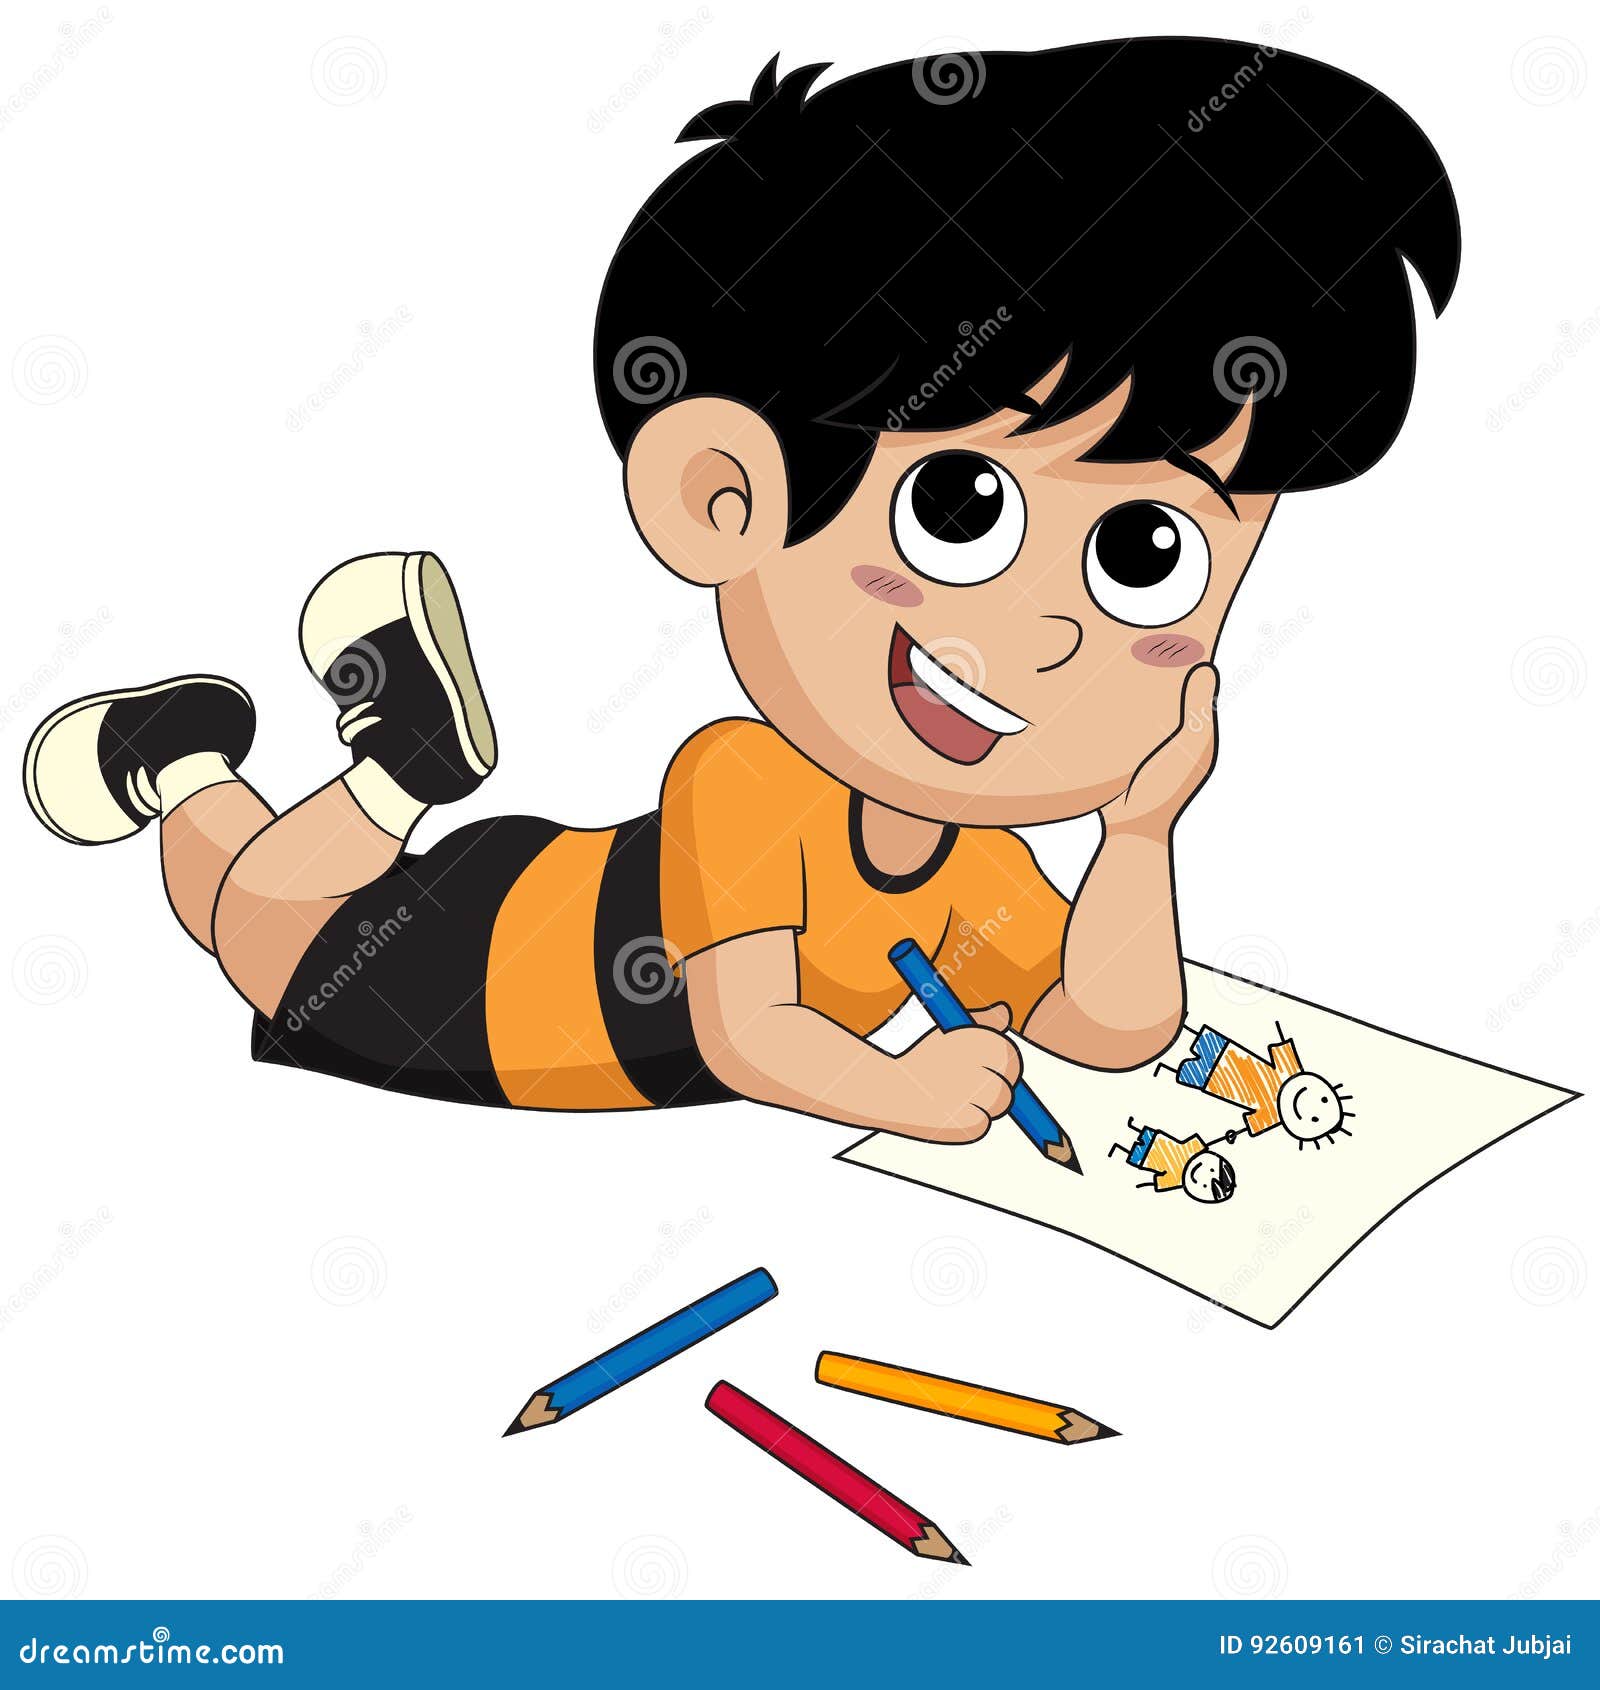 https://thumbs.dreamstime.com/z/kid-drawing-pictures-vector-illustration-92609161.jpg